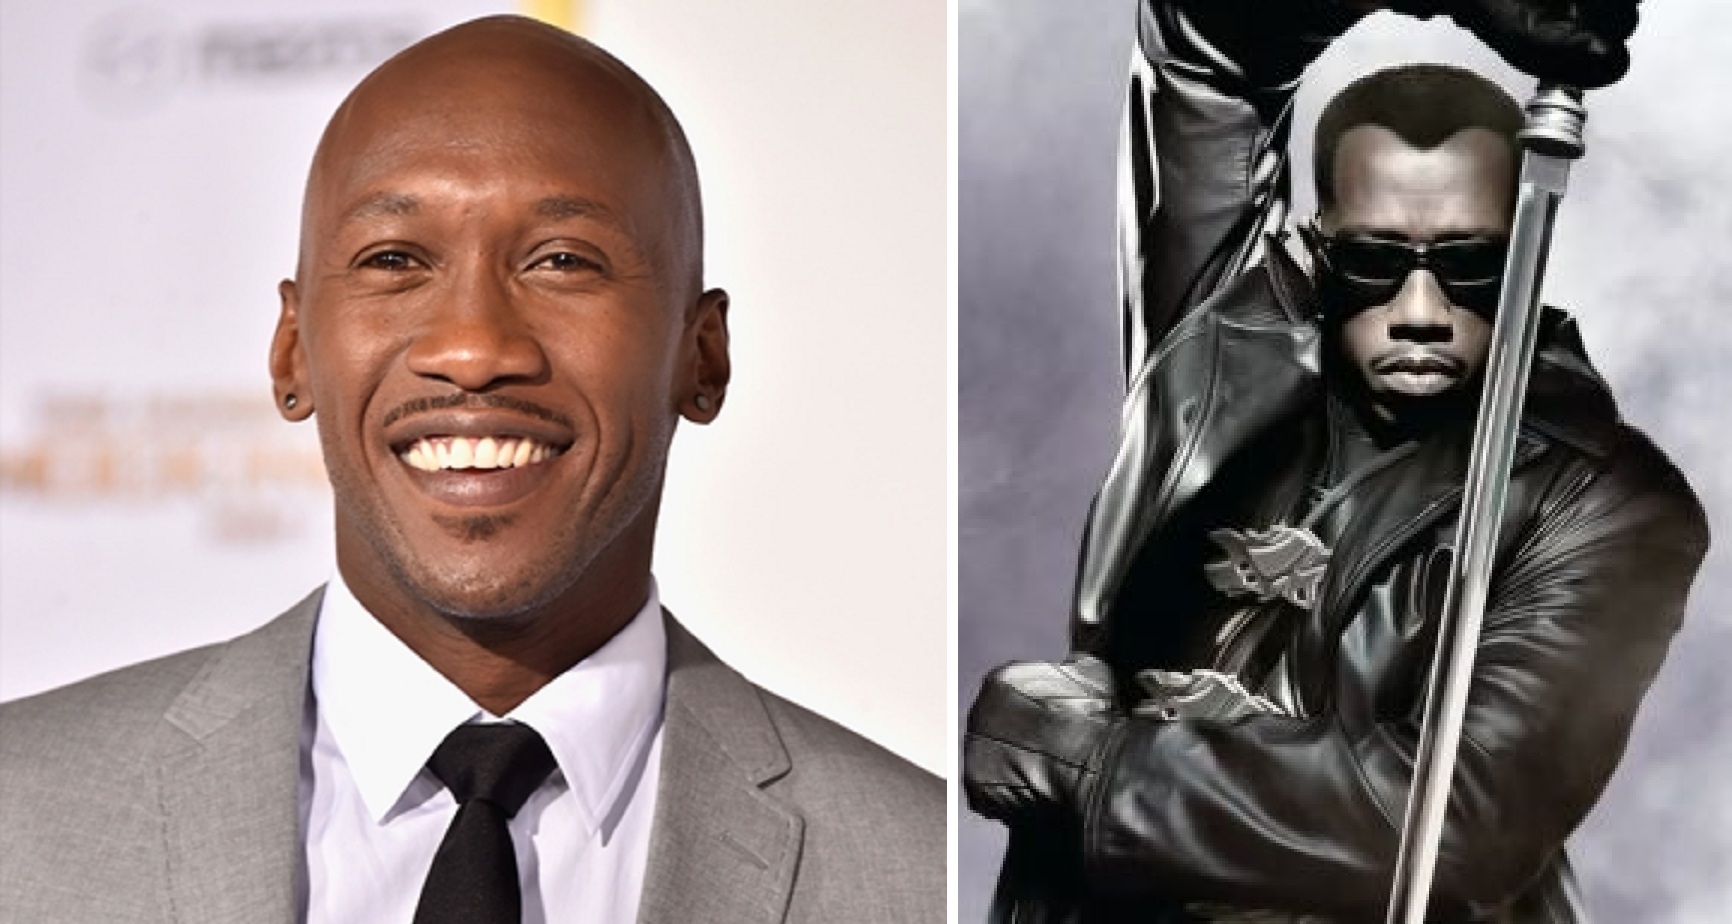 Mahershala Ali Has Been Cast To Play ‘Blade’ in the Film’s Reboot